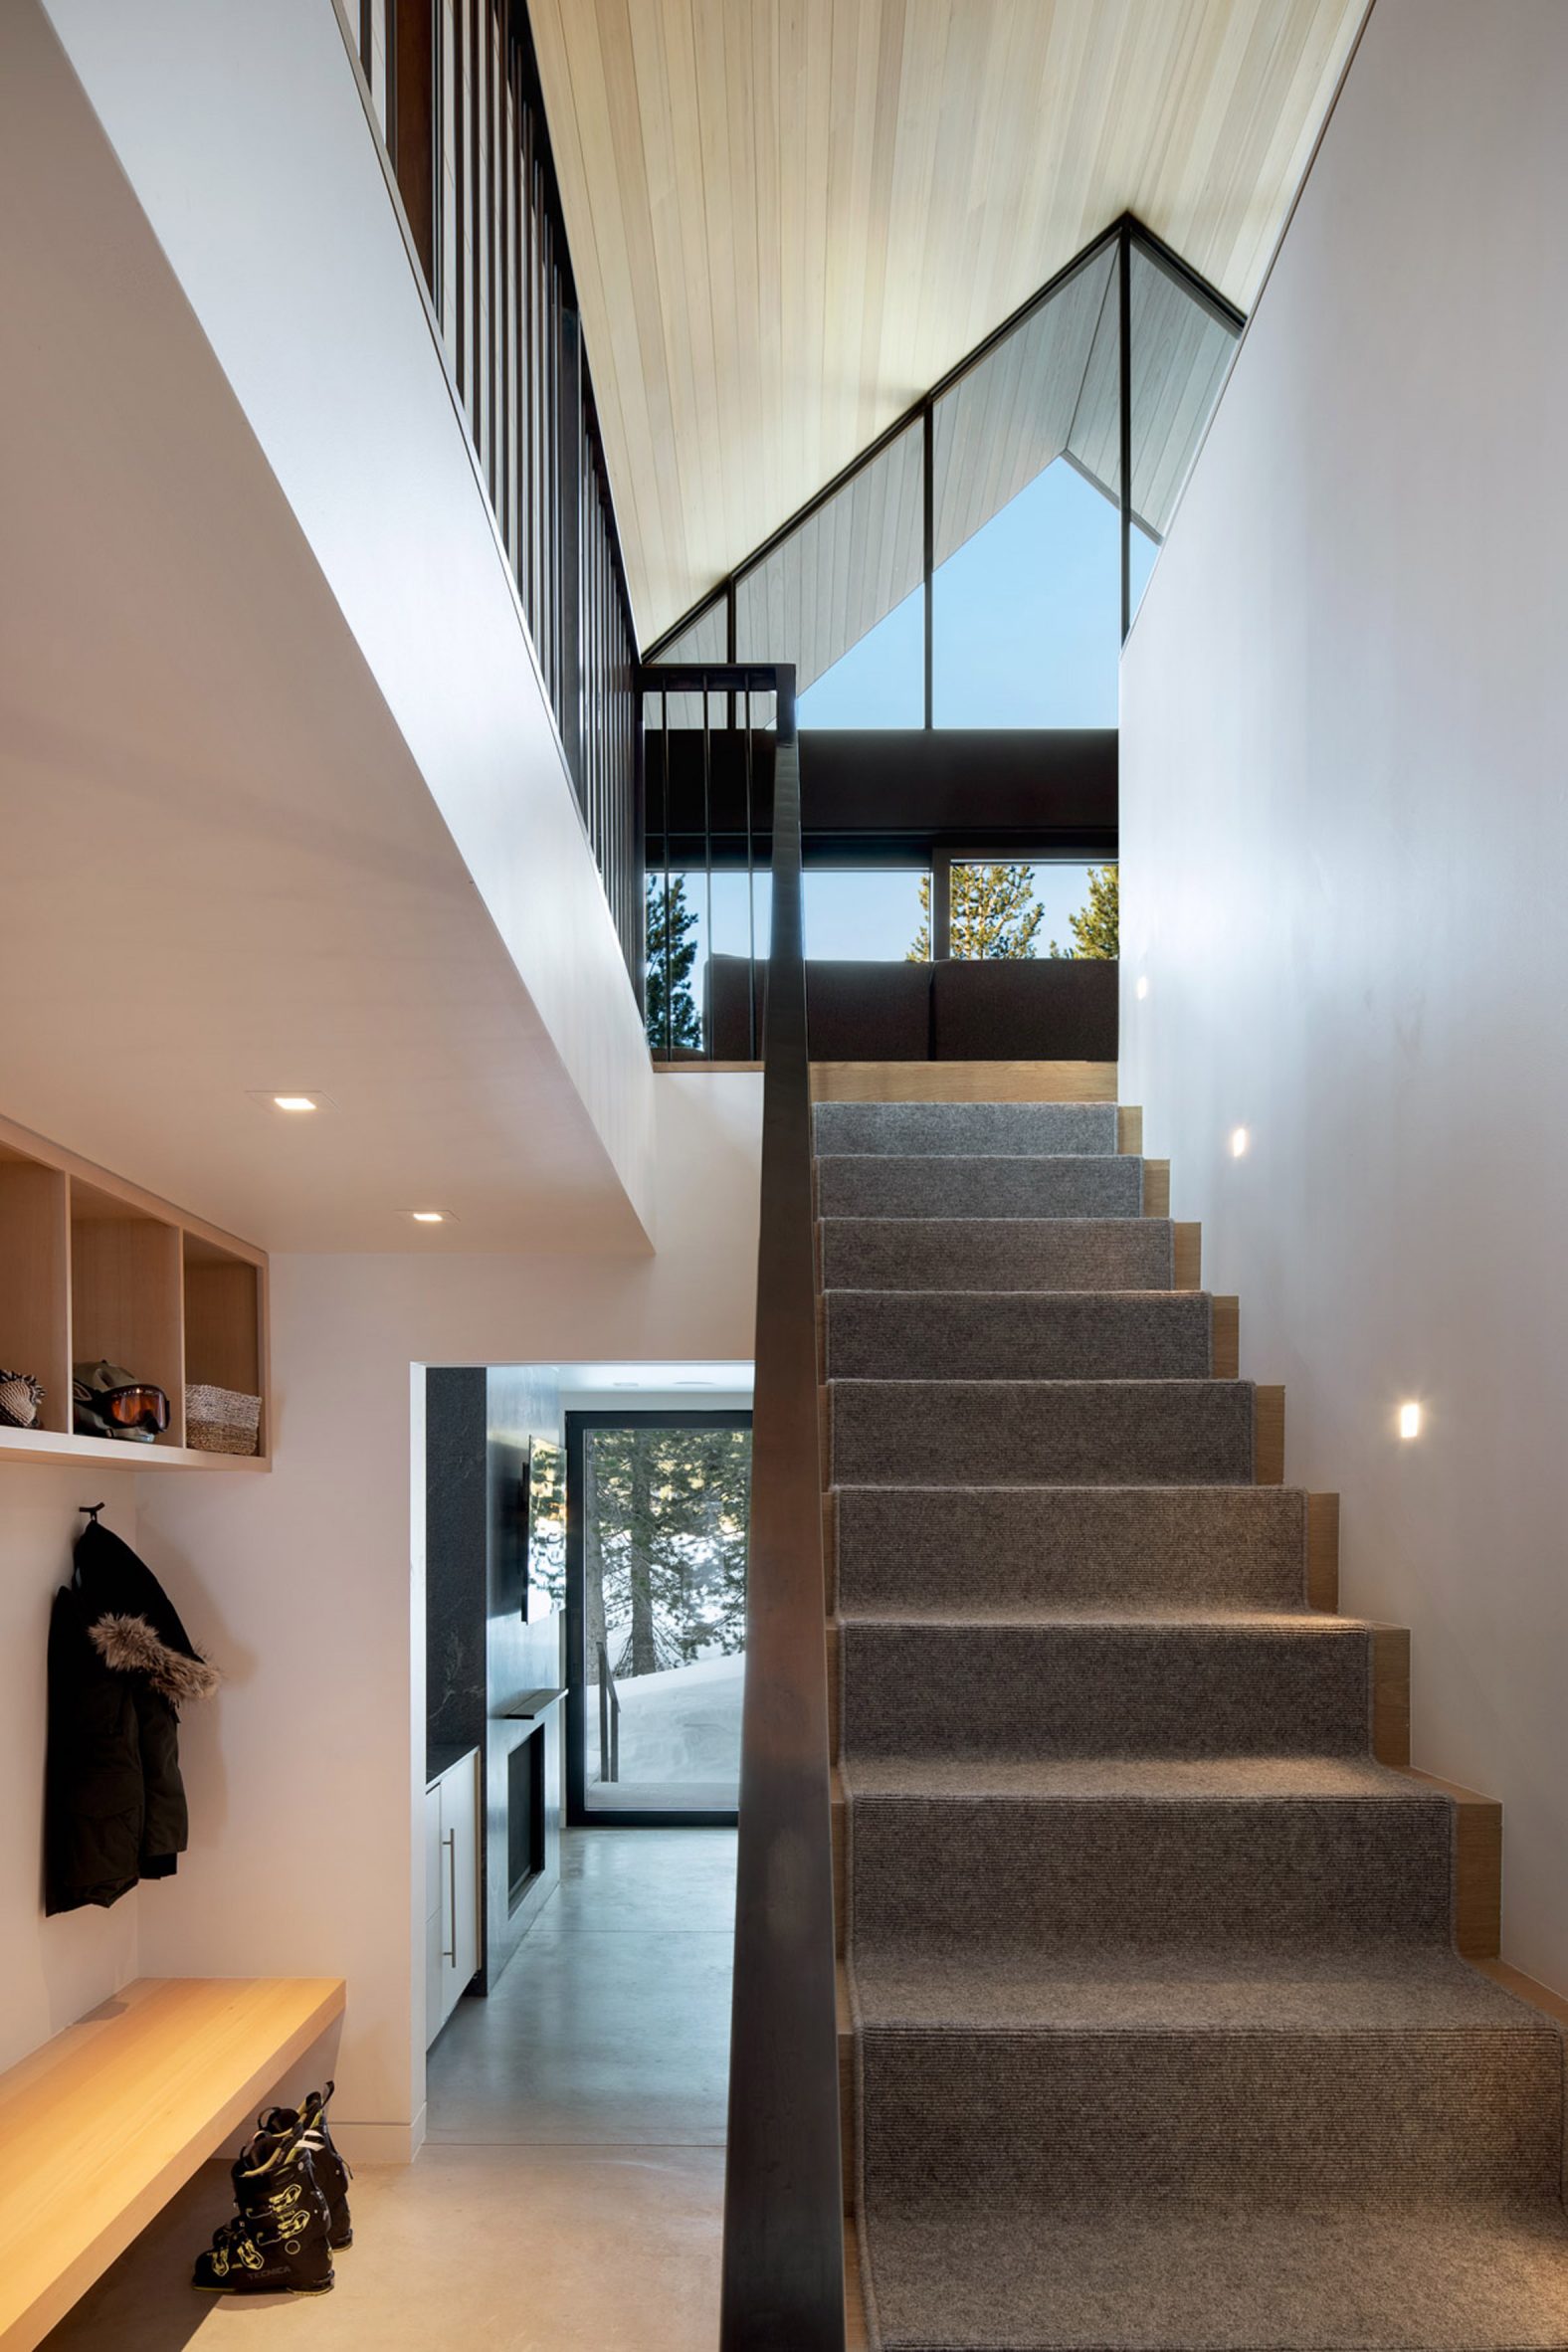 Staircase in house in California